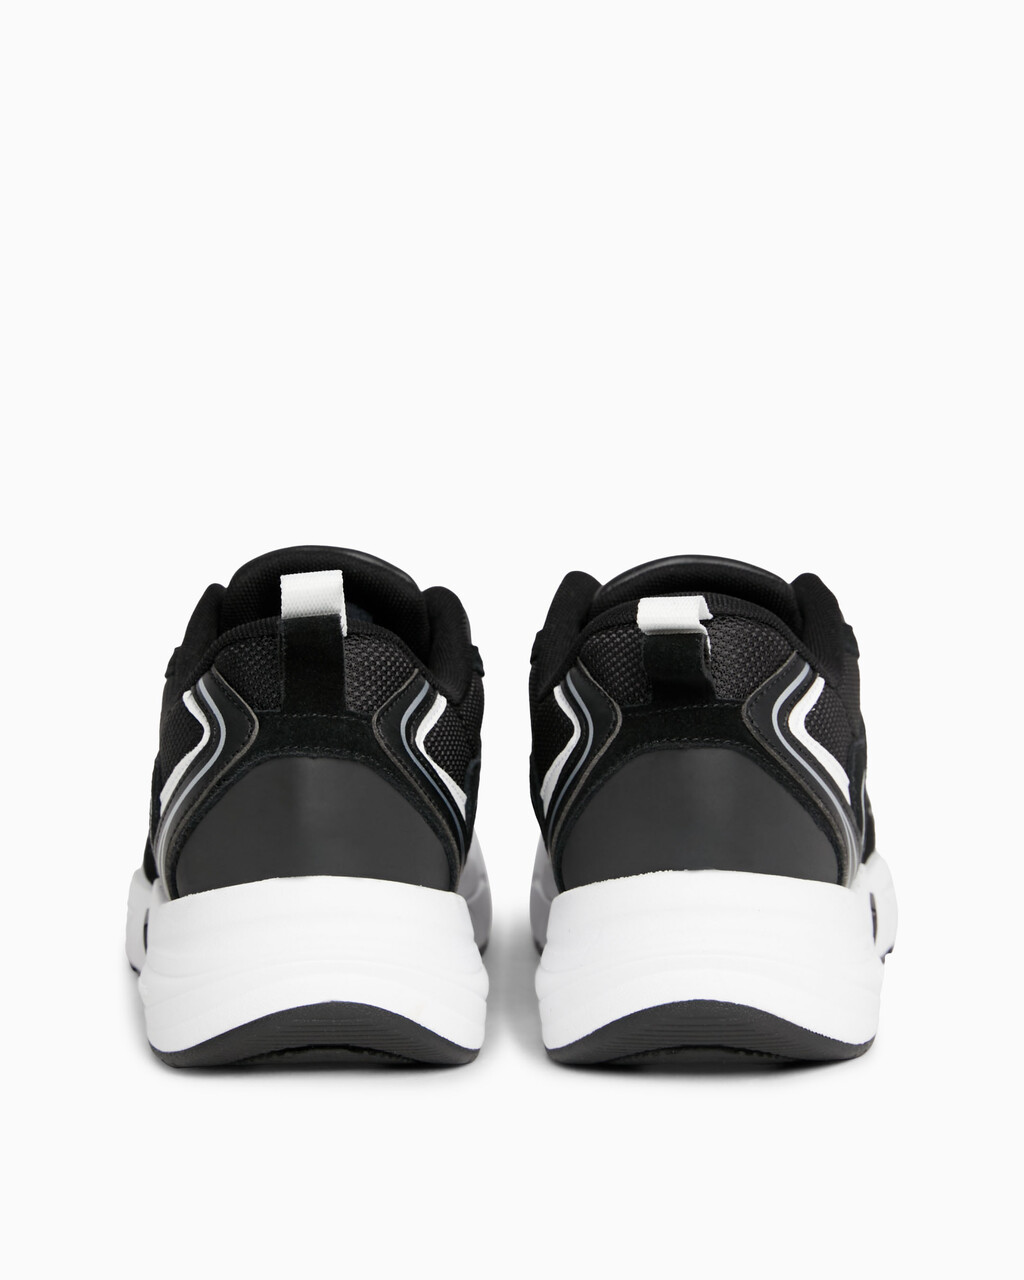 Leather Sneakers, Black/Bright White, hi-res